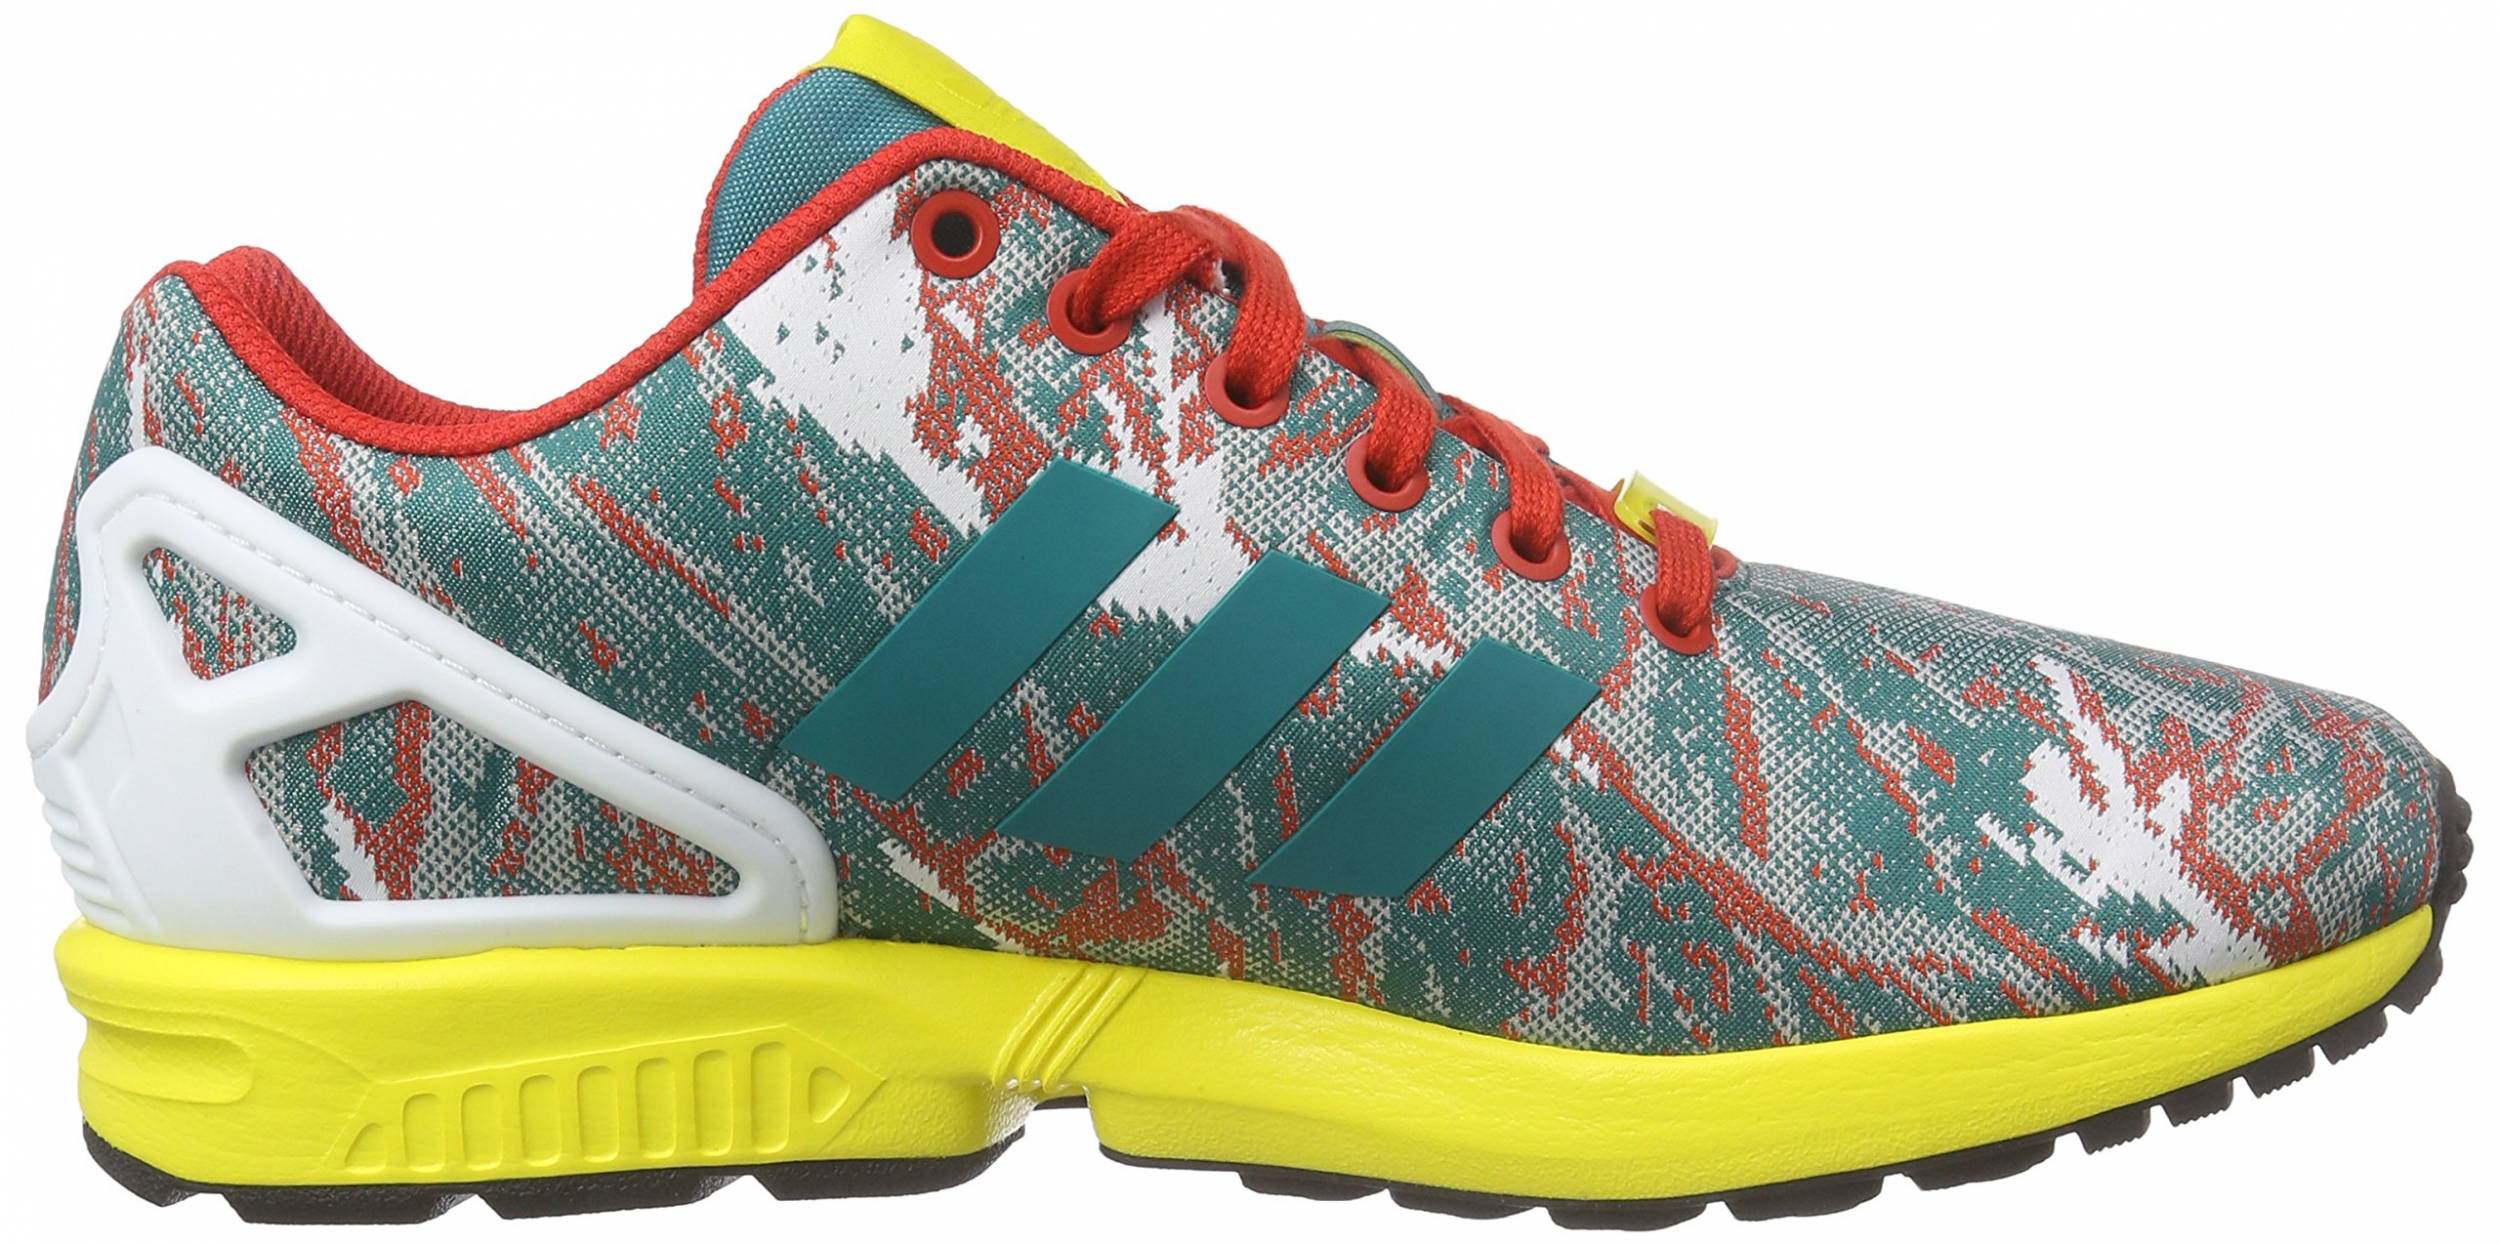 Only £45 + Review of Adidas ZX Flux Weave | RunRepeat